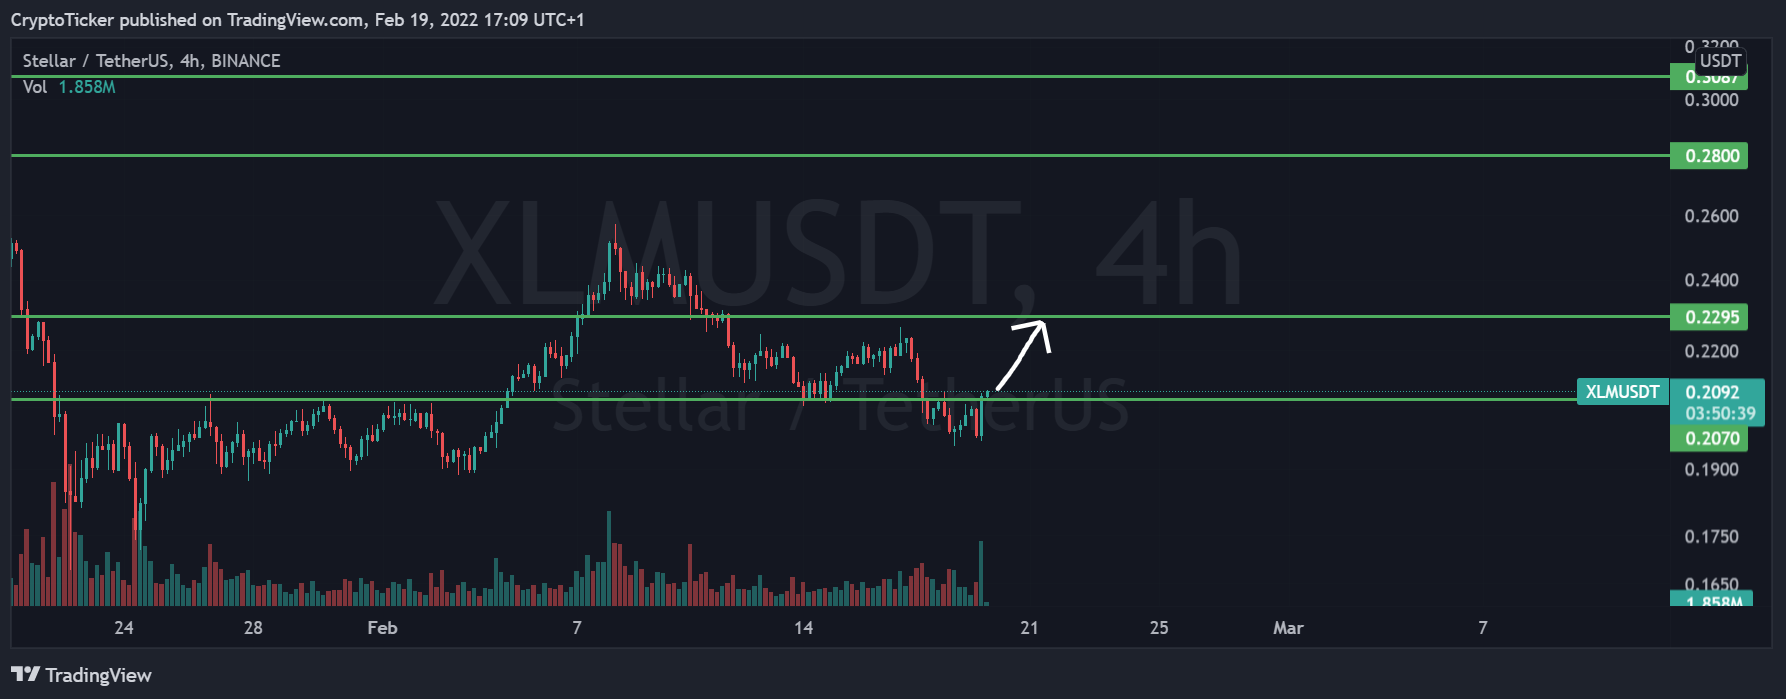 Stellar price: XLM/USDT 4-hours chart showing the potential uptrend of XLM